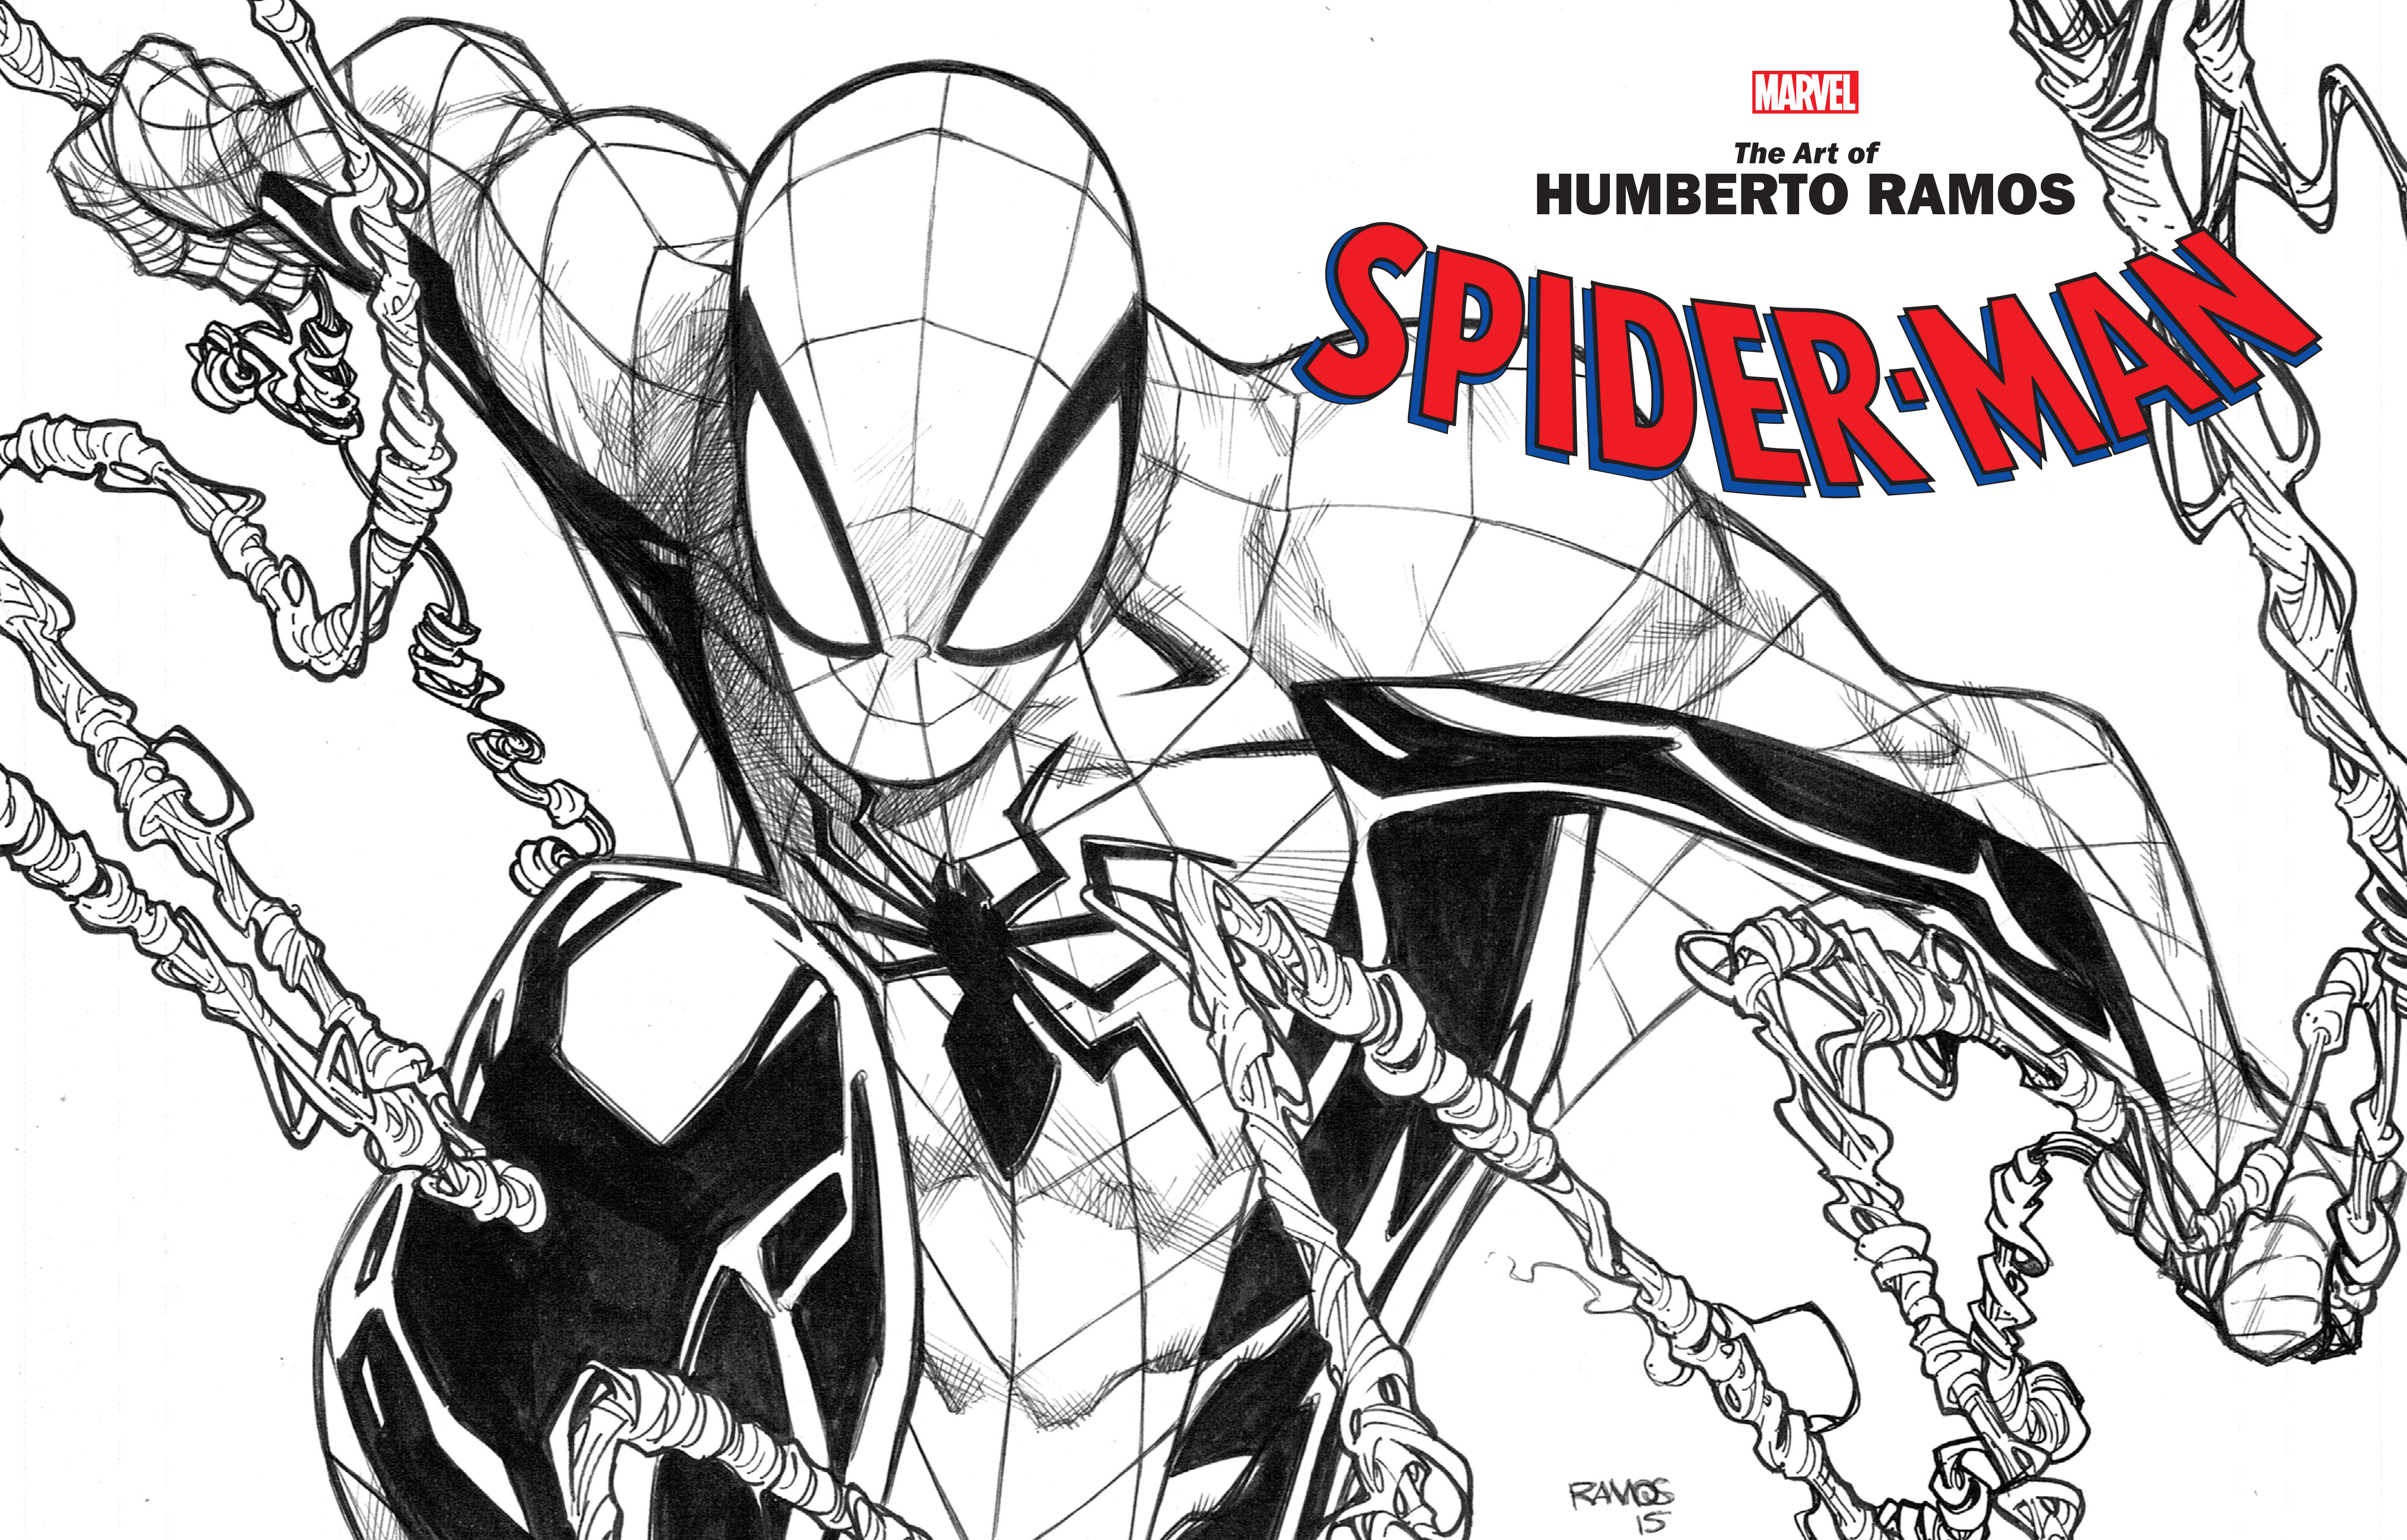 Read online Marvel Monograph: The Art of Humberto Ramos: Spider-Man comic -  Issue # TPB - 3